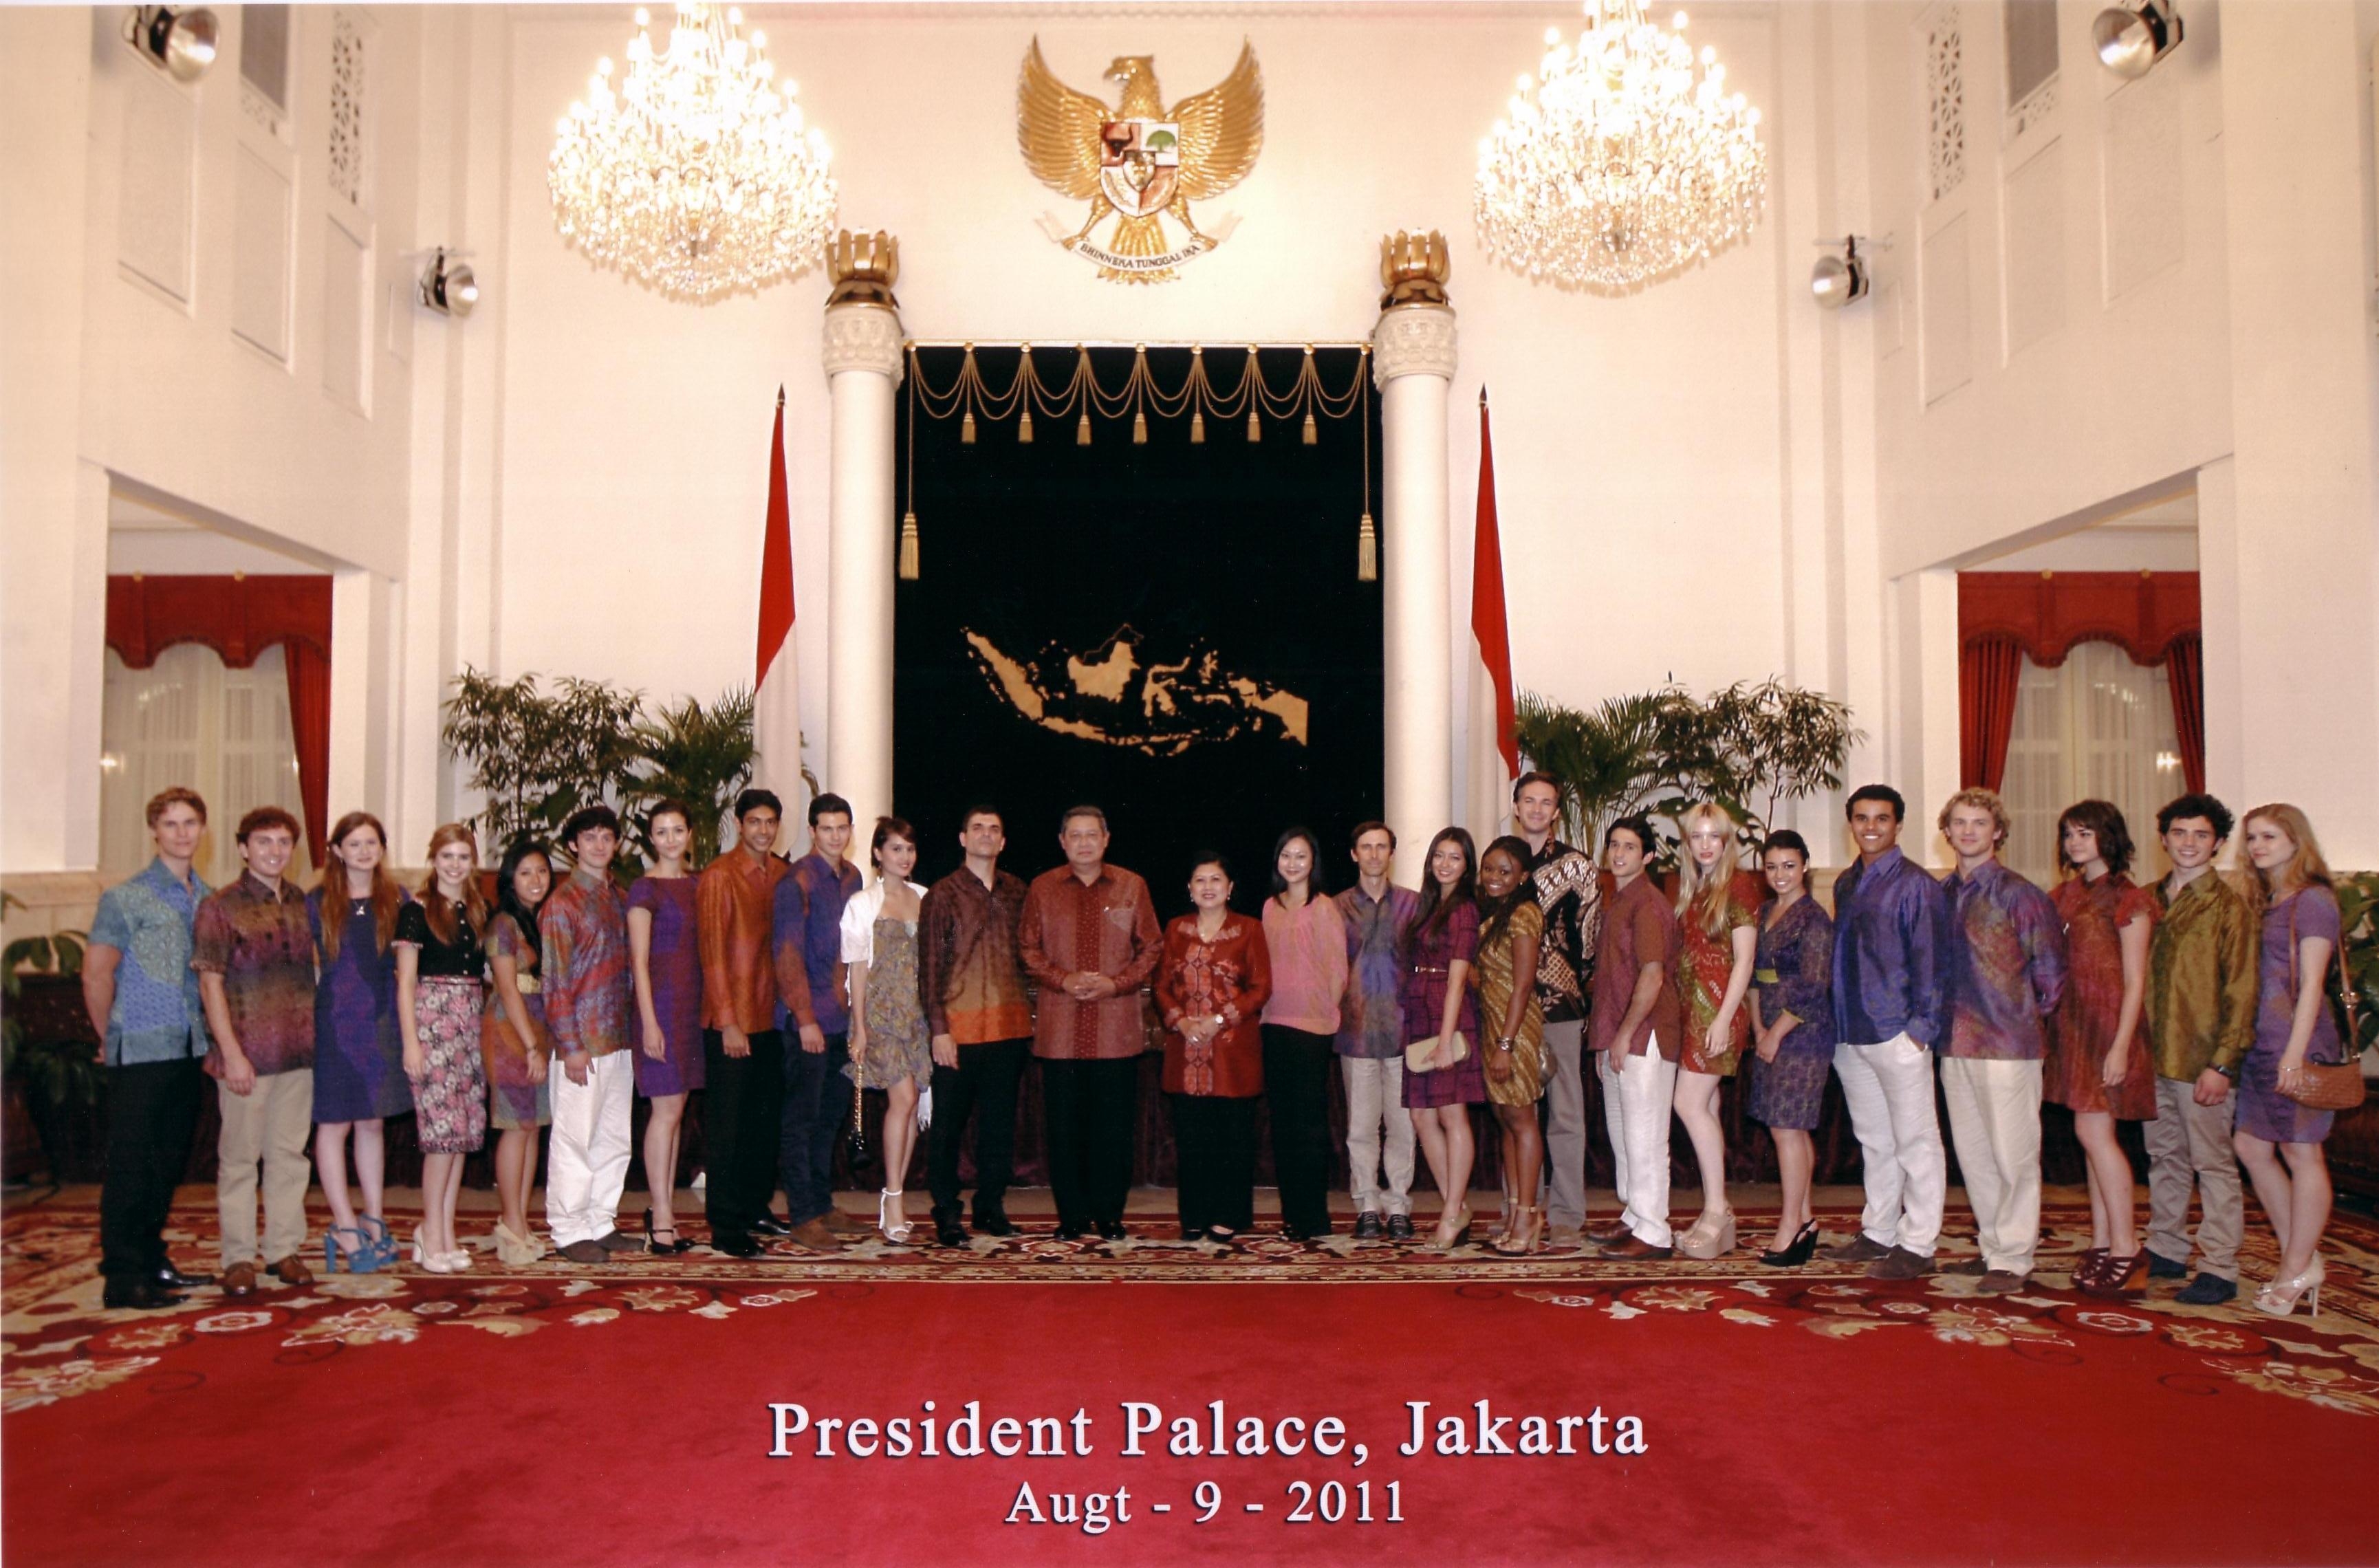 The Philosophers cast at the President's palace with the President of Indonesia, Susilo Bambang Yudhoyono.